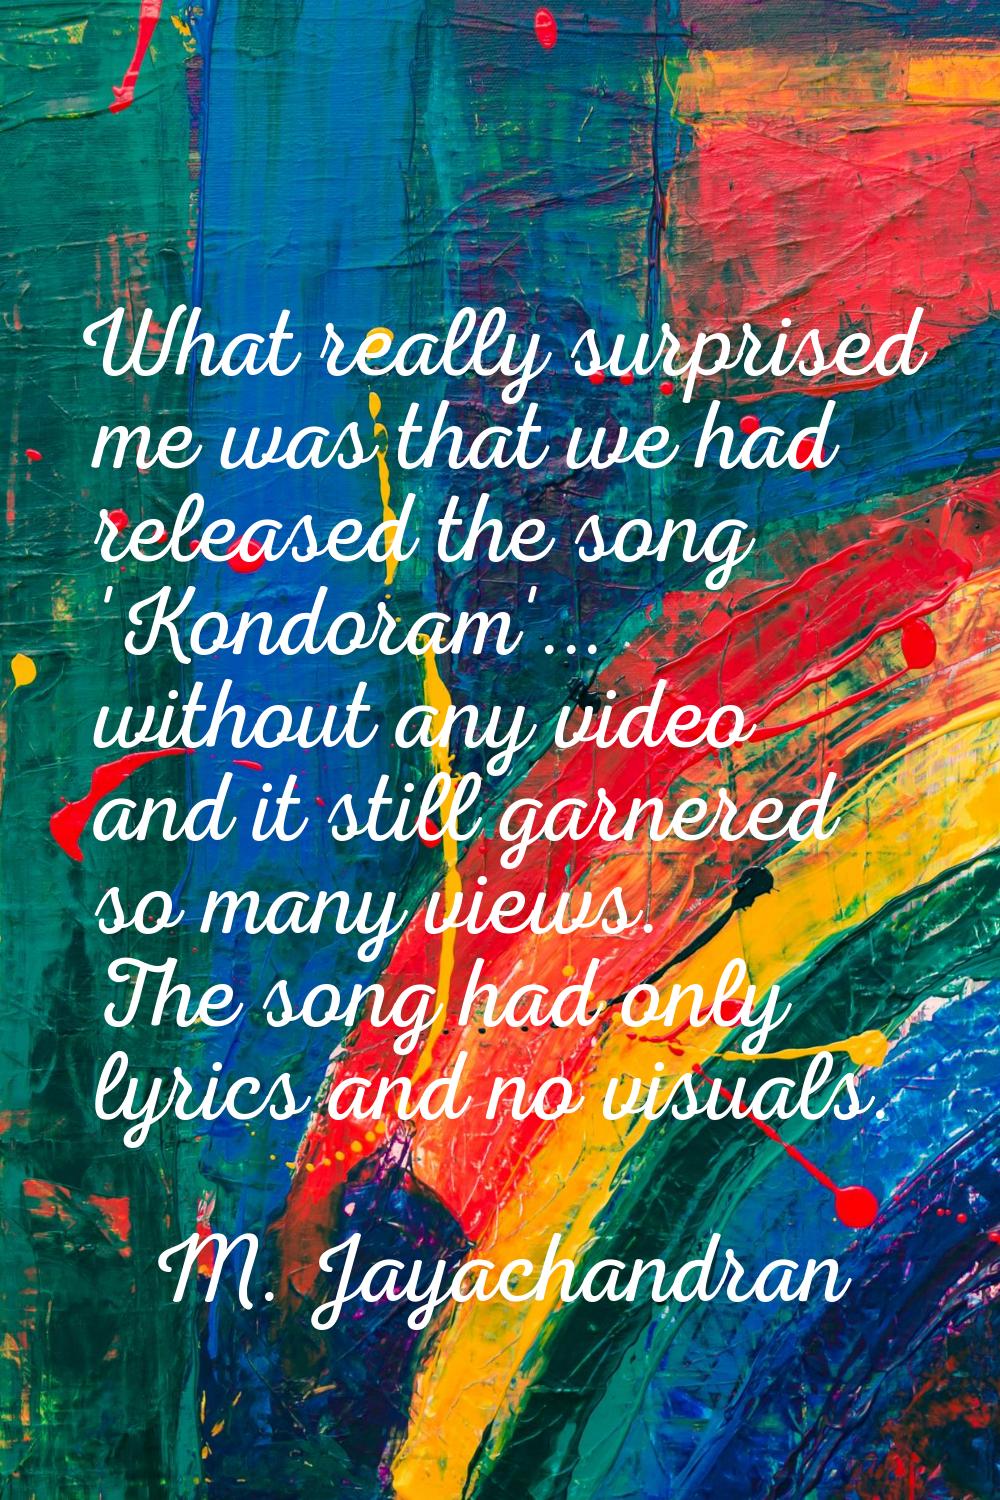 What really surprised me was that we had released the song 'Kondoram'... without any video and it s